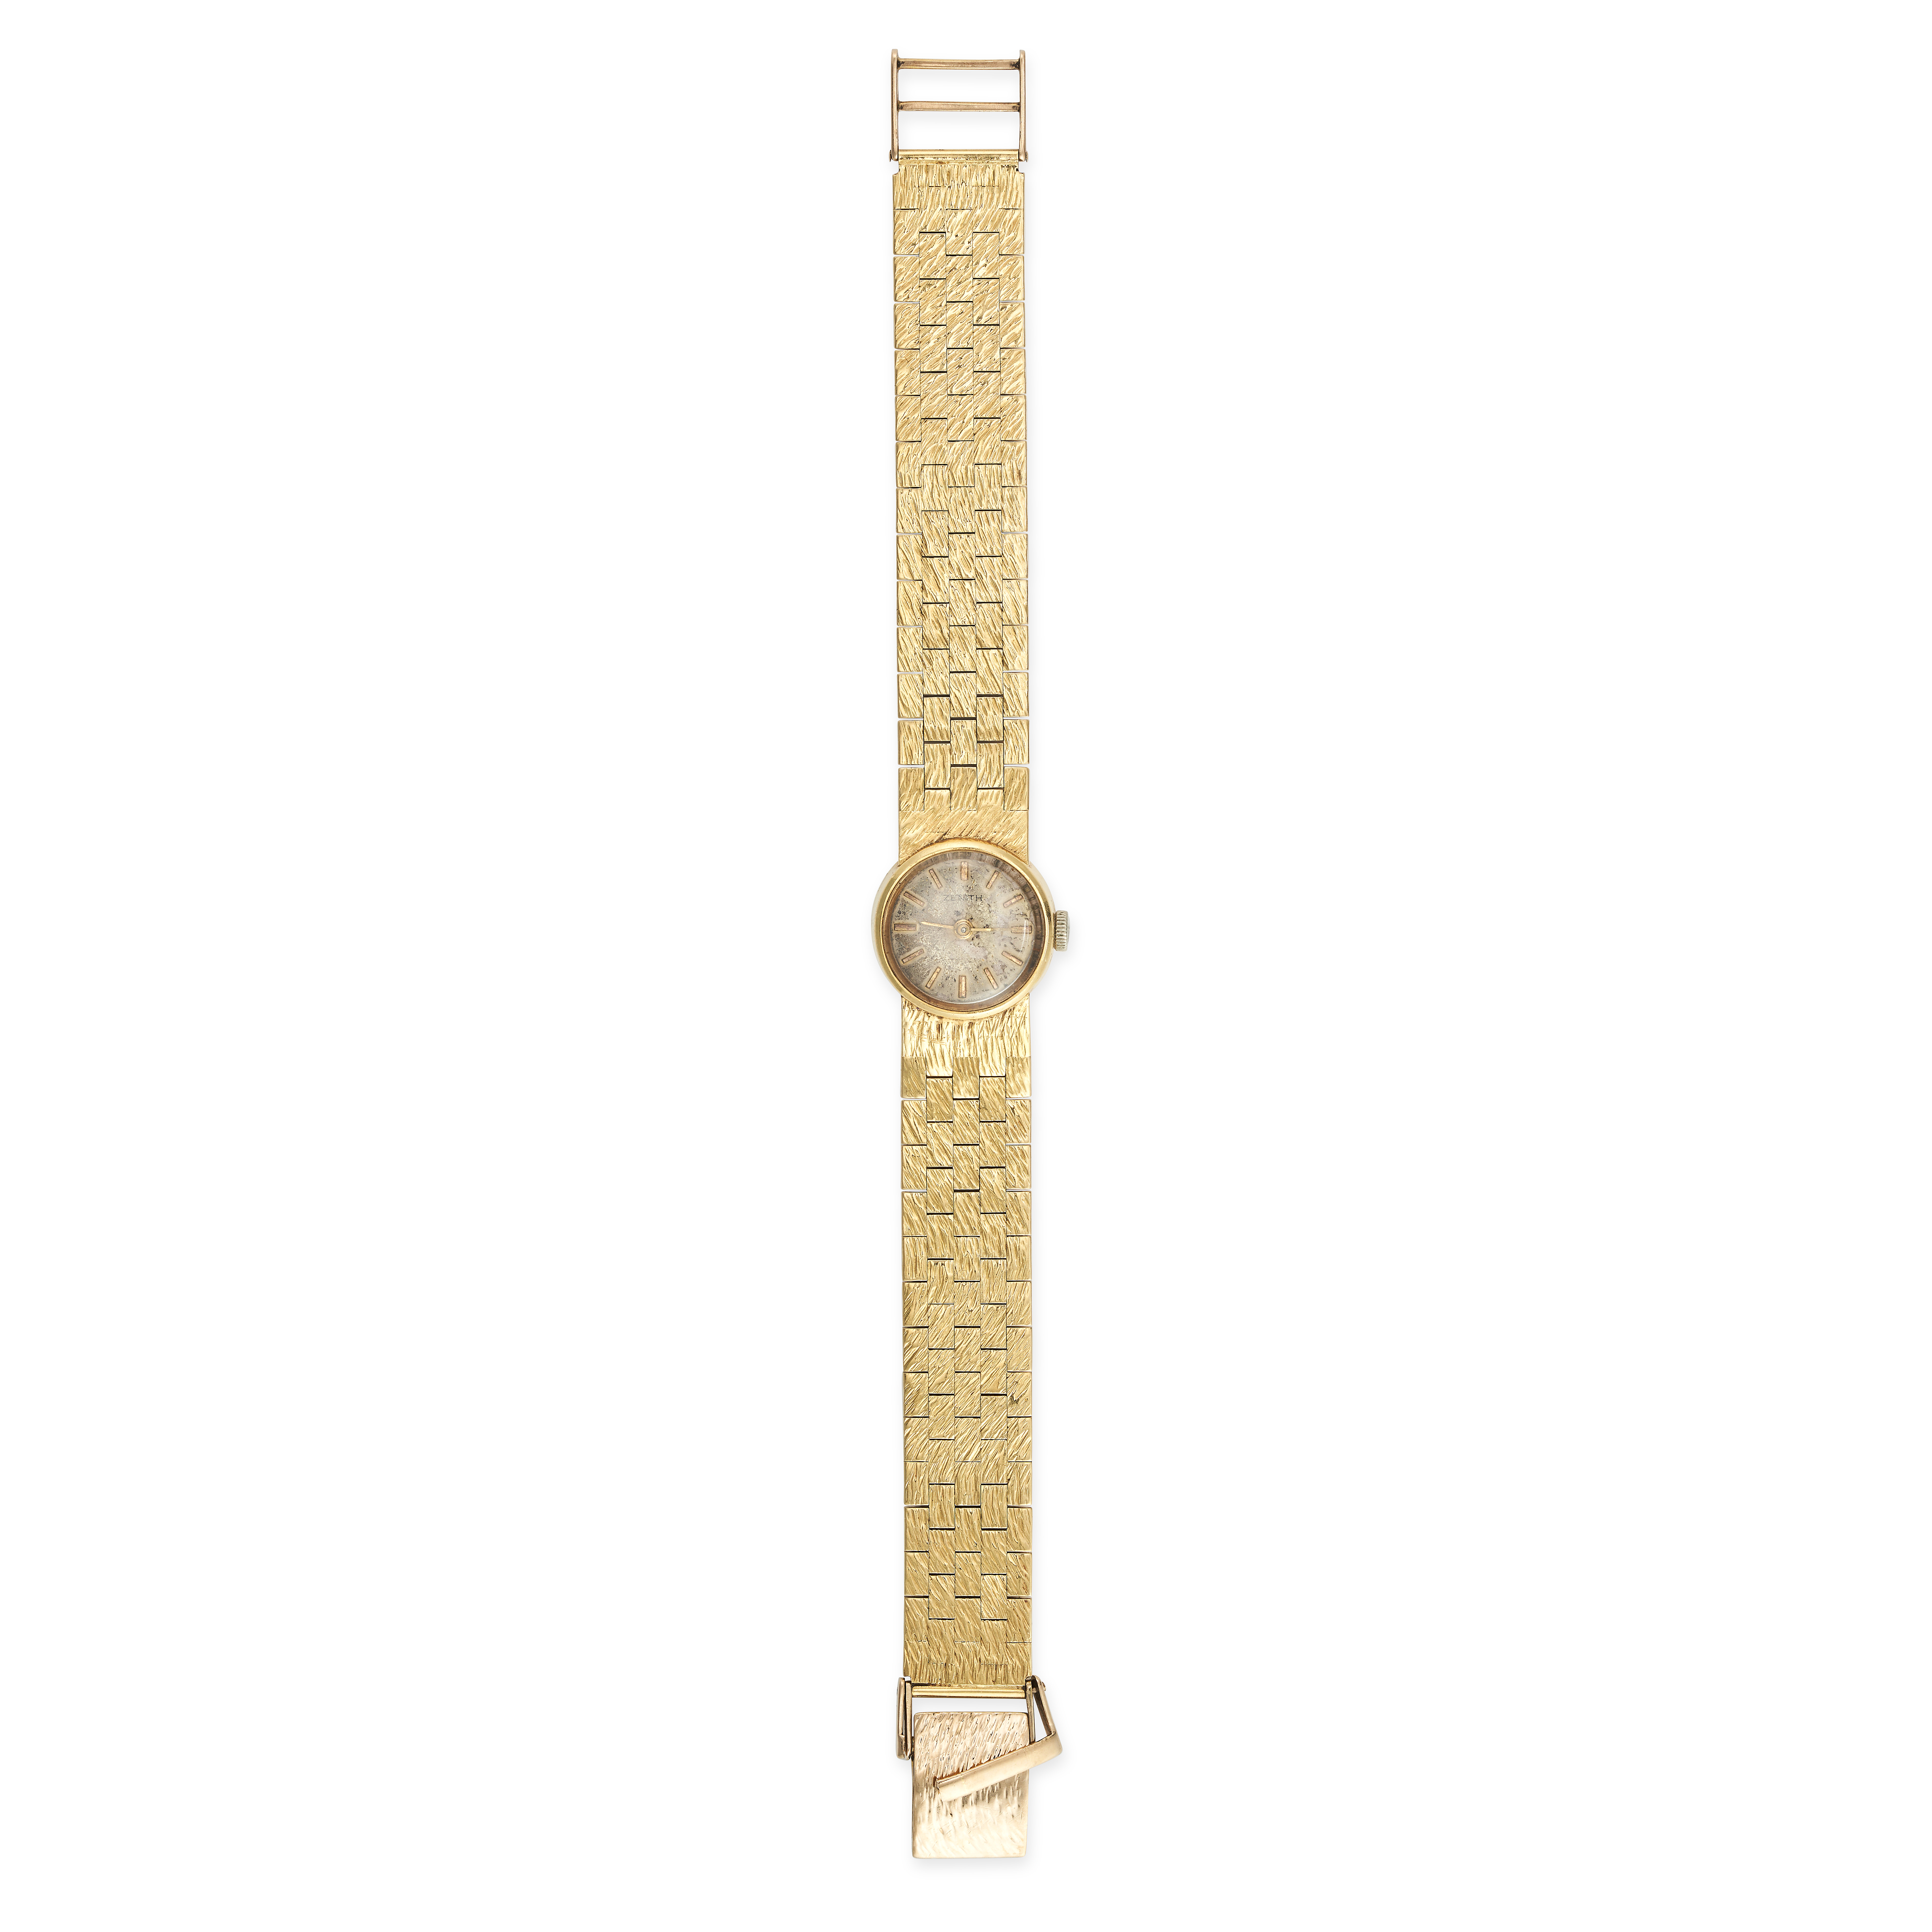 ZENITH - A LADIES VINTAGE ZENITH WRISTWATCH in 18ct yellow gold, 17 jewel manual wind movement, t...